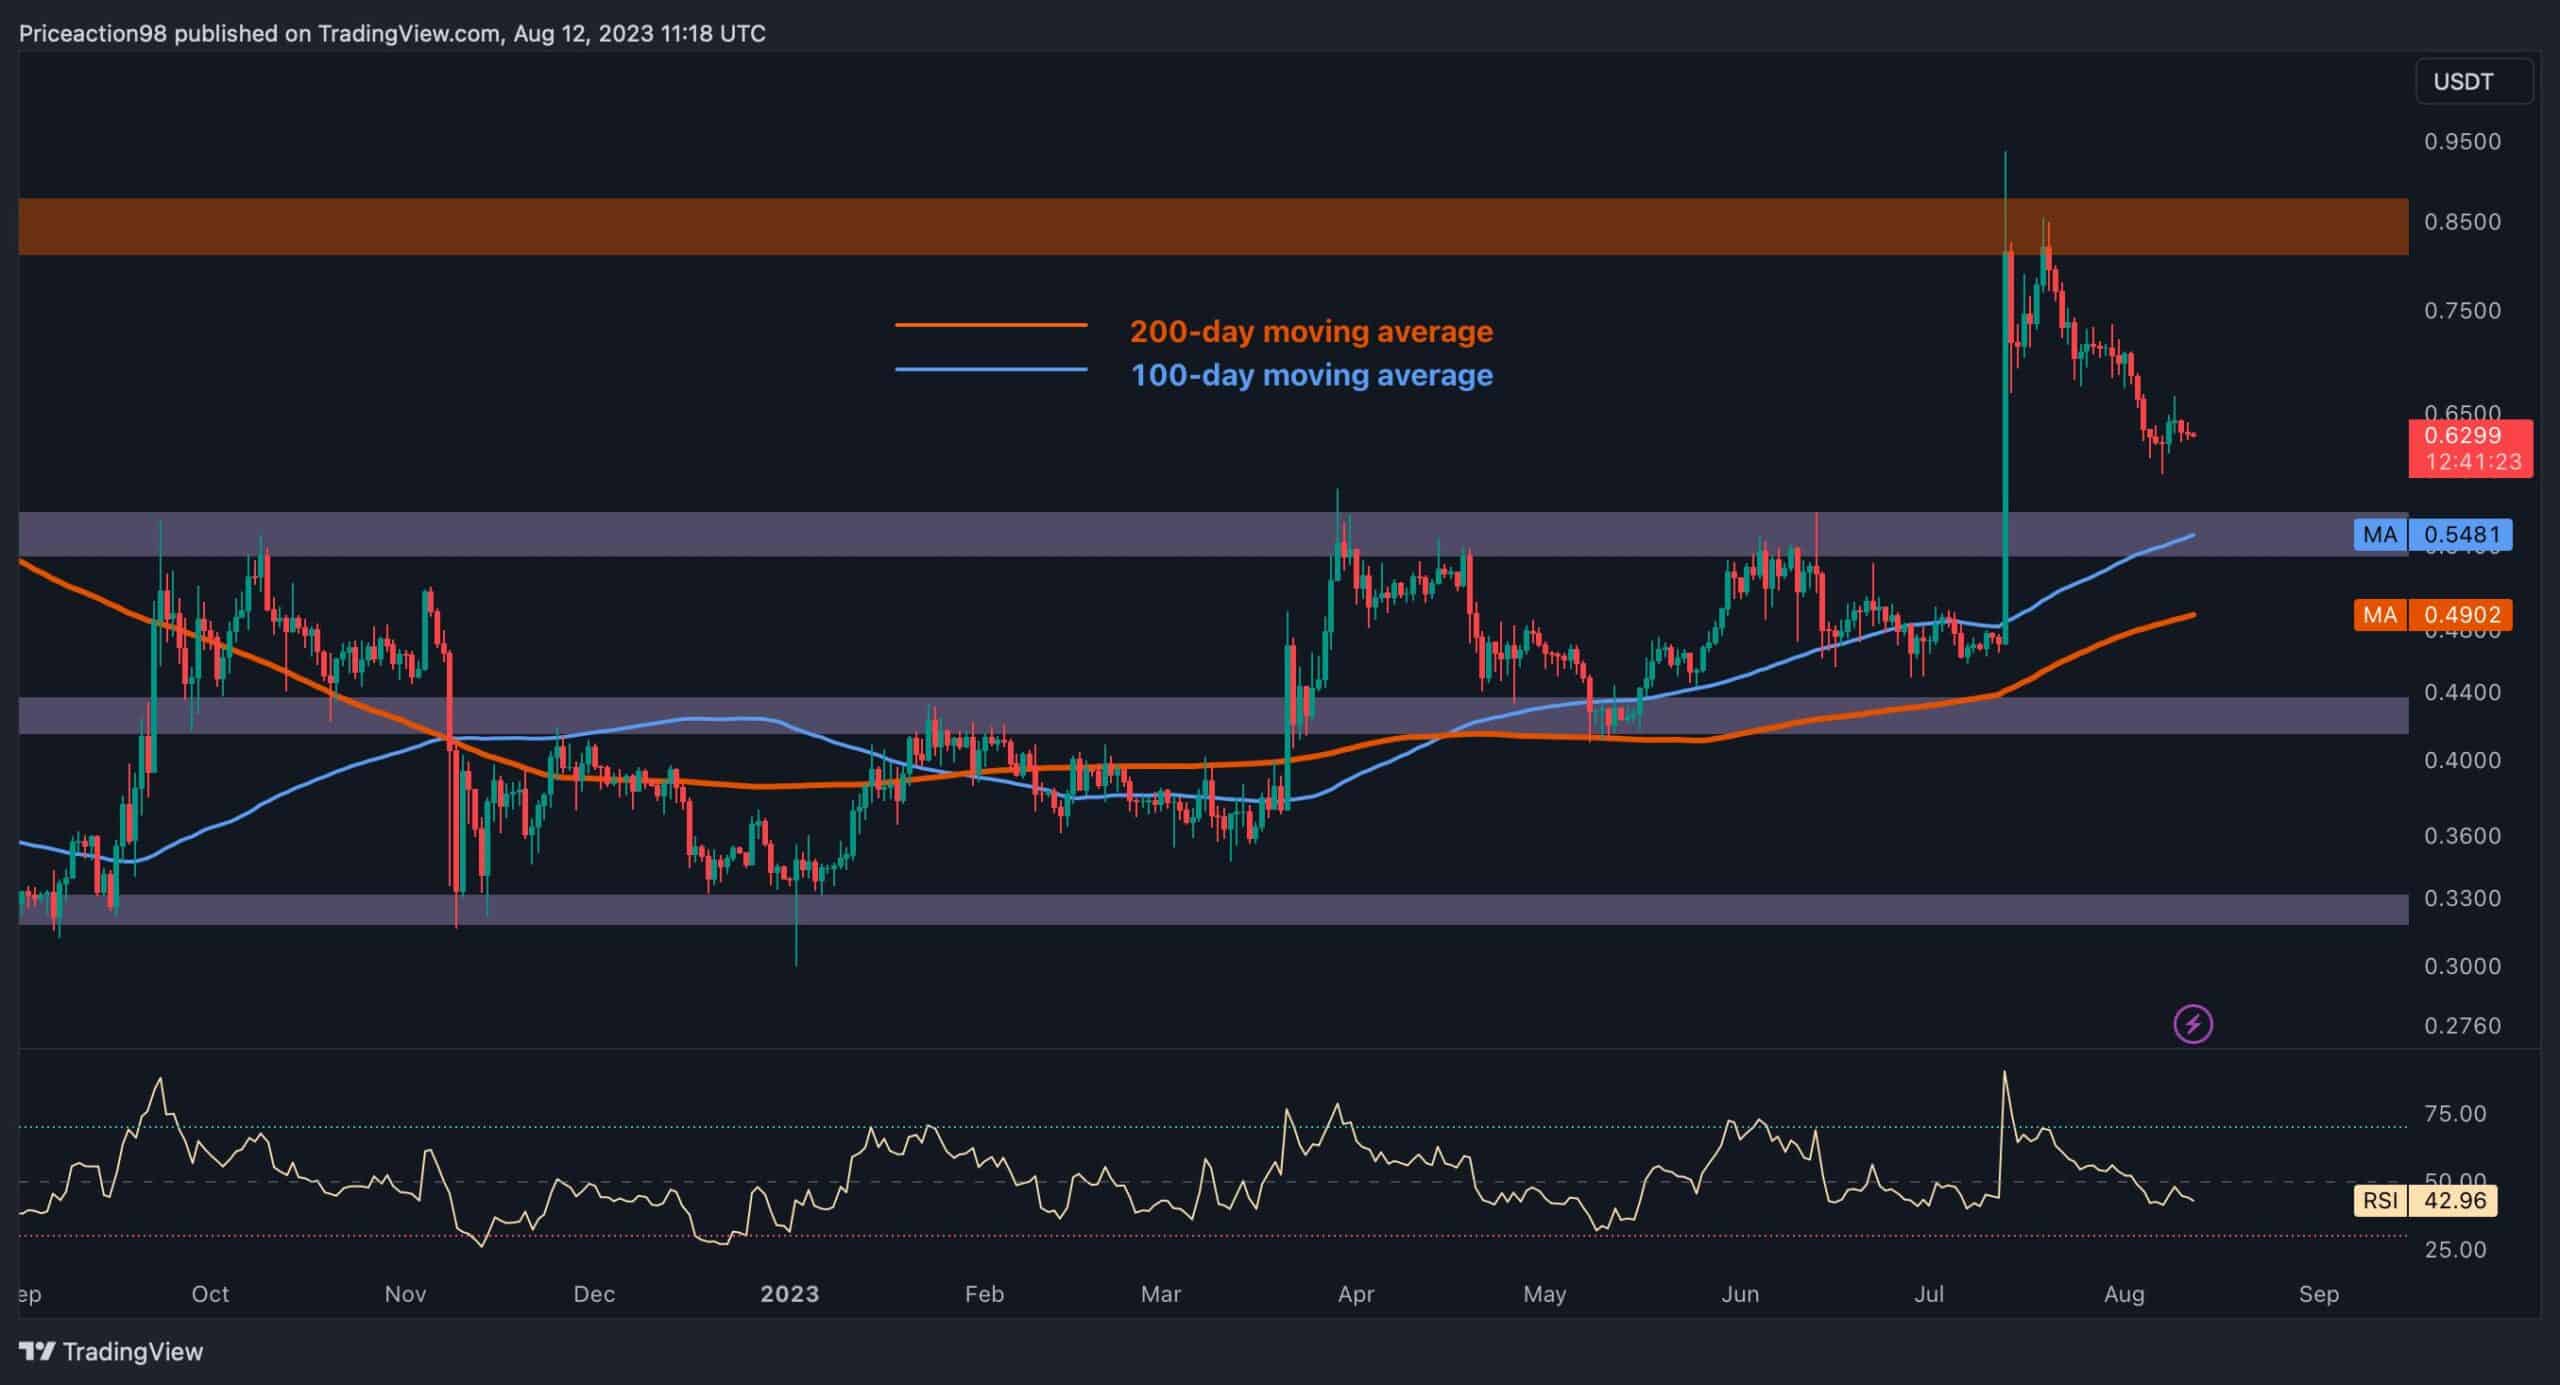 Xrp-approaches-critical-support,-can-it-bounce-back-toward-$0.8?-(ripple-price-analysis)